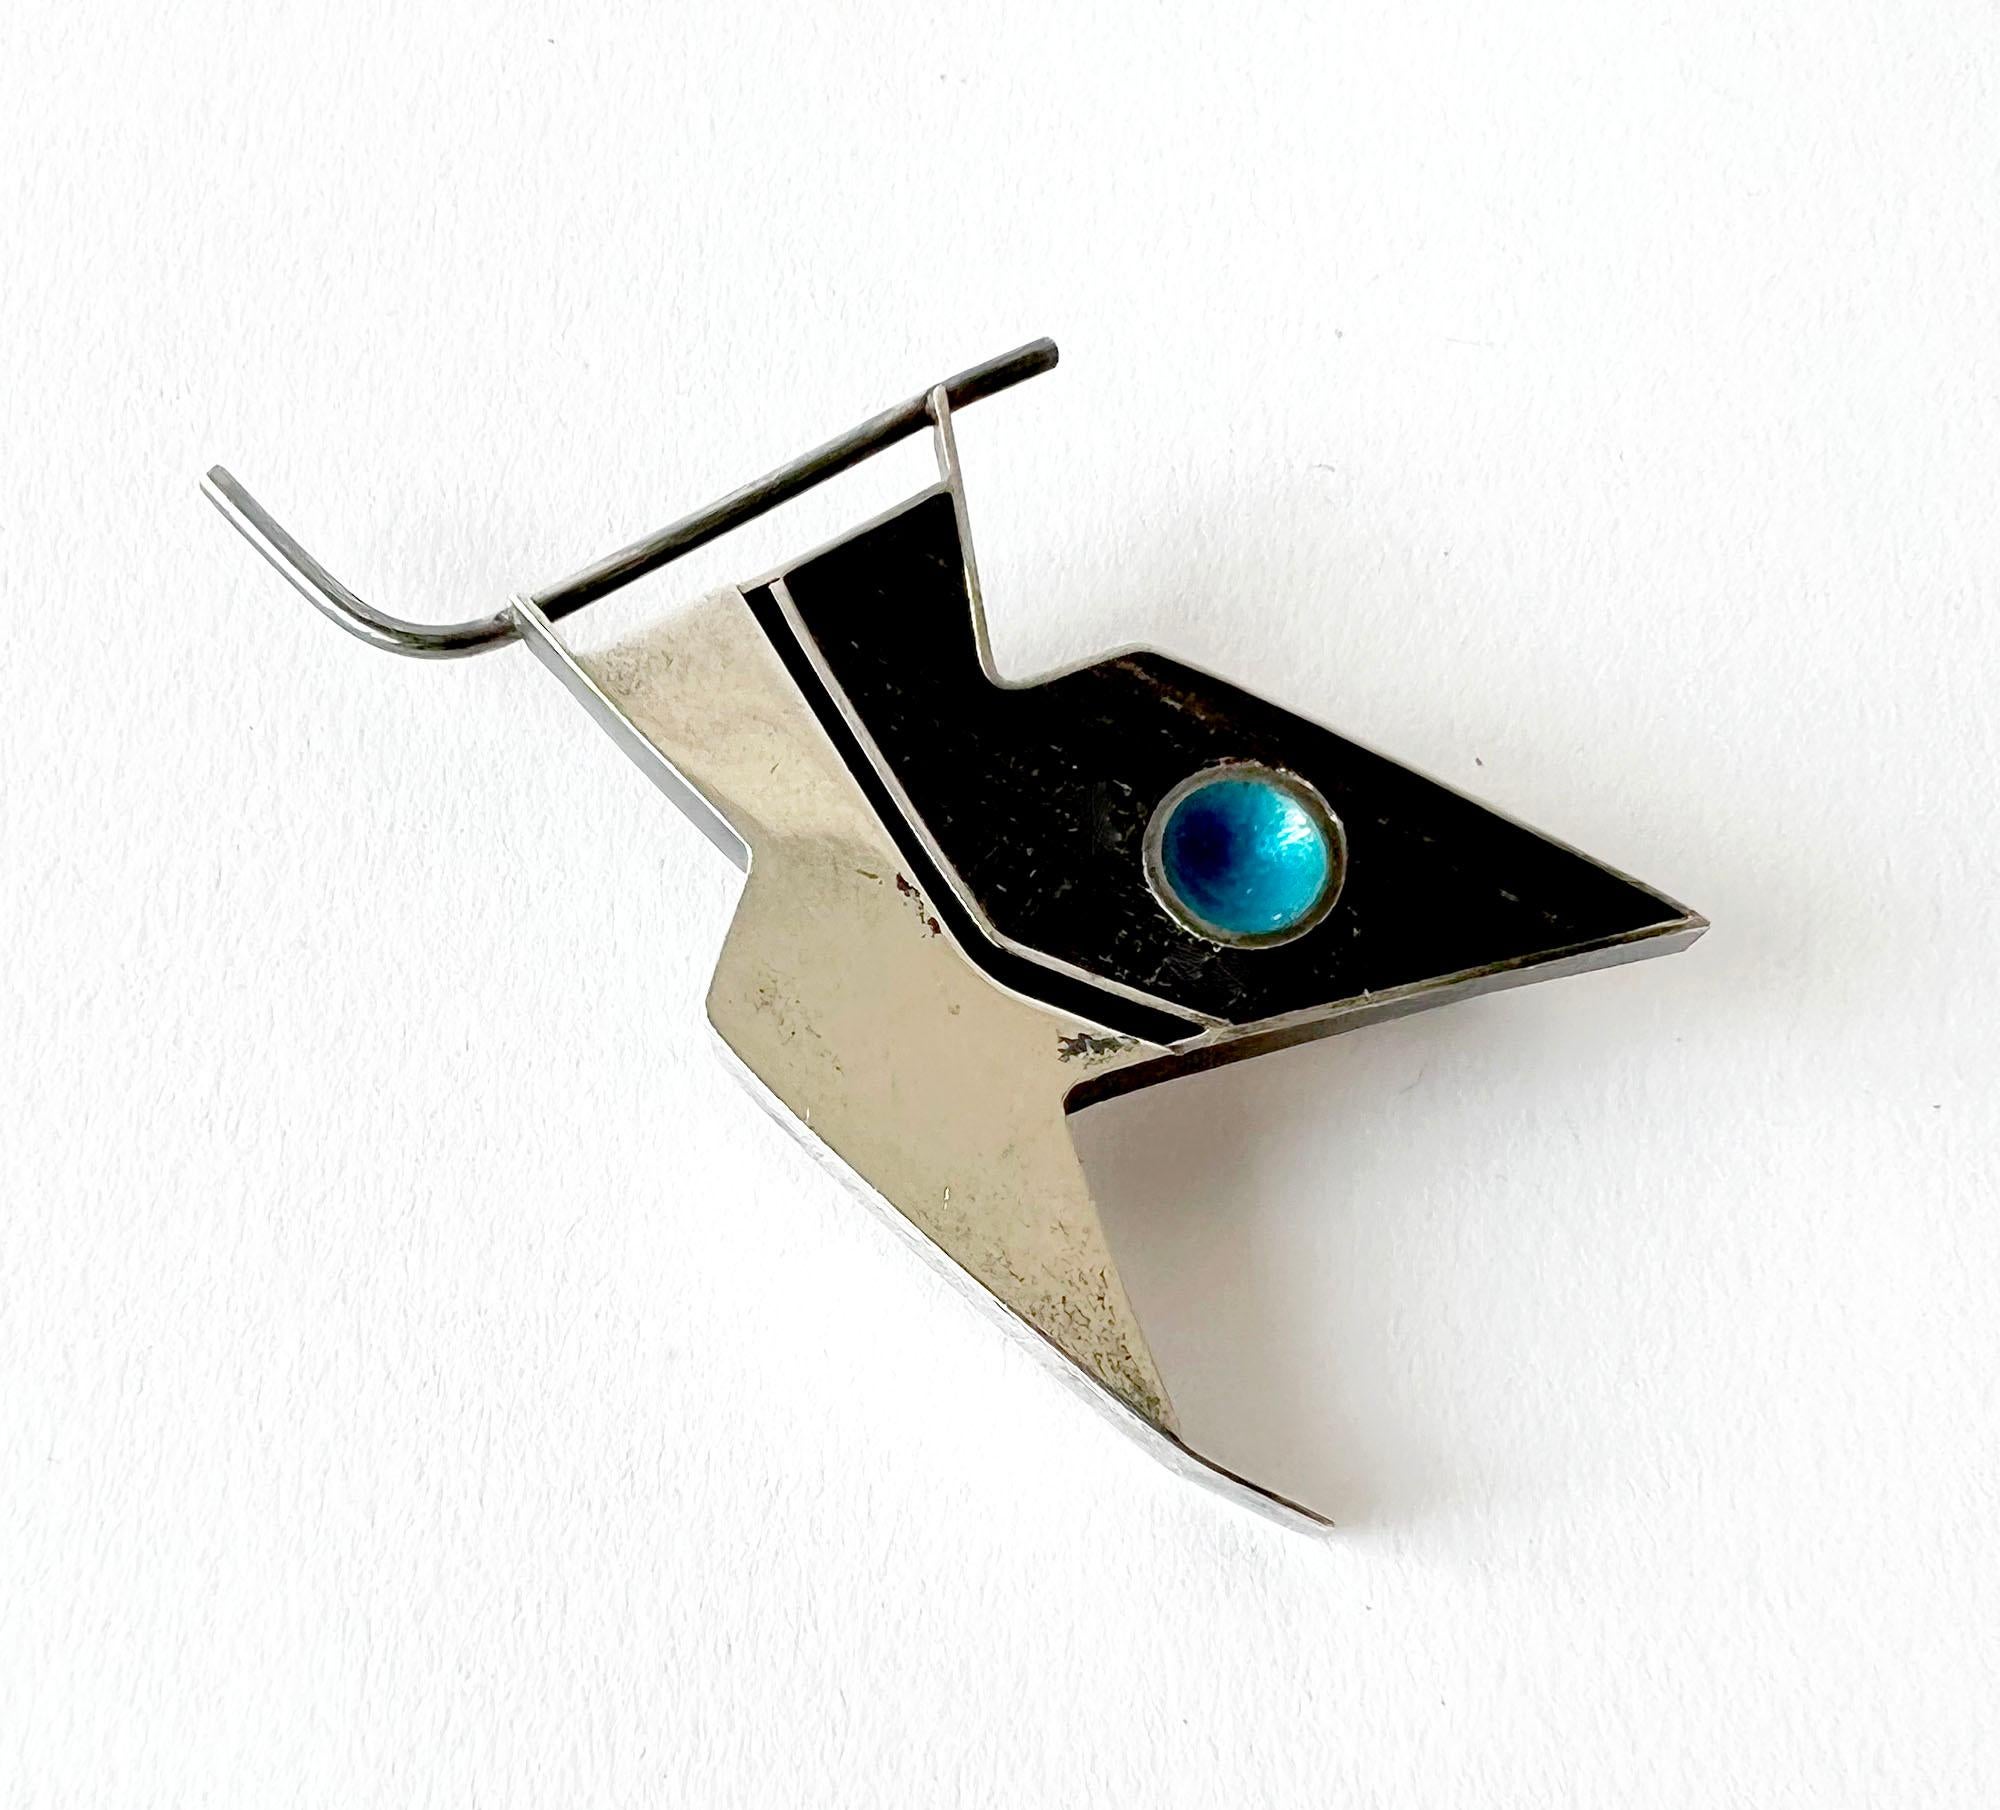 Sterling silver, ebony and enamel inlay modernist bird brooch created by Lynn Rogers Porter, a student of Earl Pardon while at Skidmore College in Saratoga Springs, New York.  Brooch measures 1.5